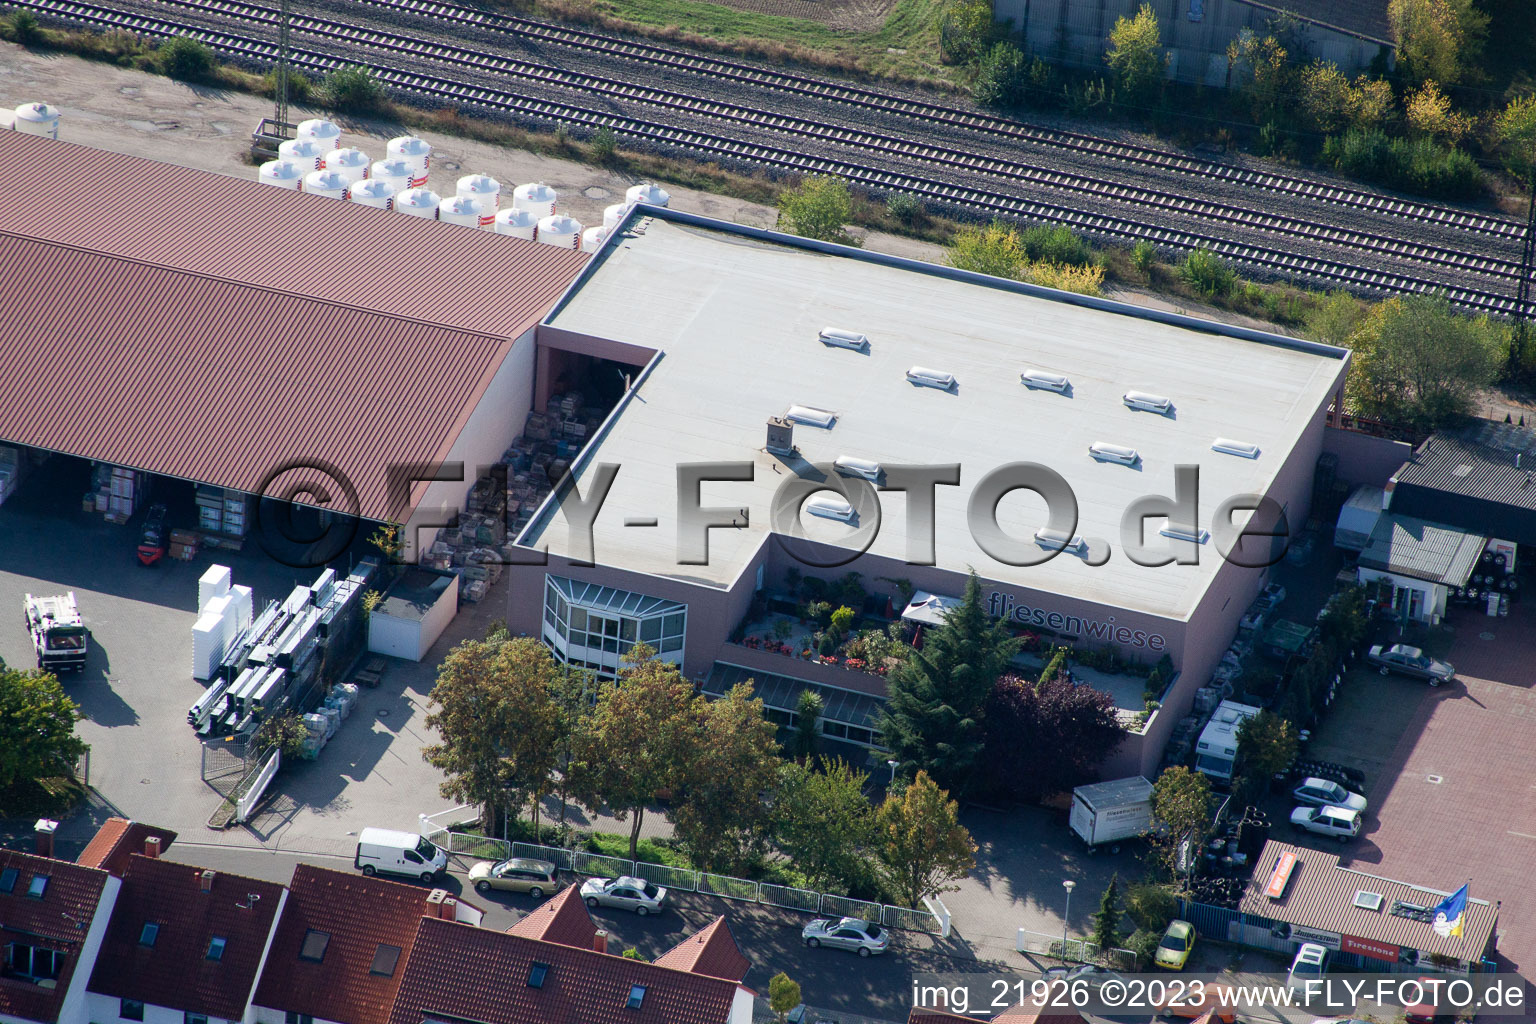 Oblique view of Industrial Estate in the district Bobenheim in Bobenheim-Roxheim in the state Rhineland-Palatinate, Germany